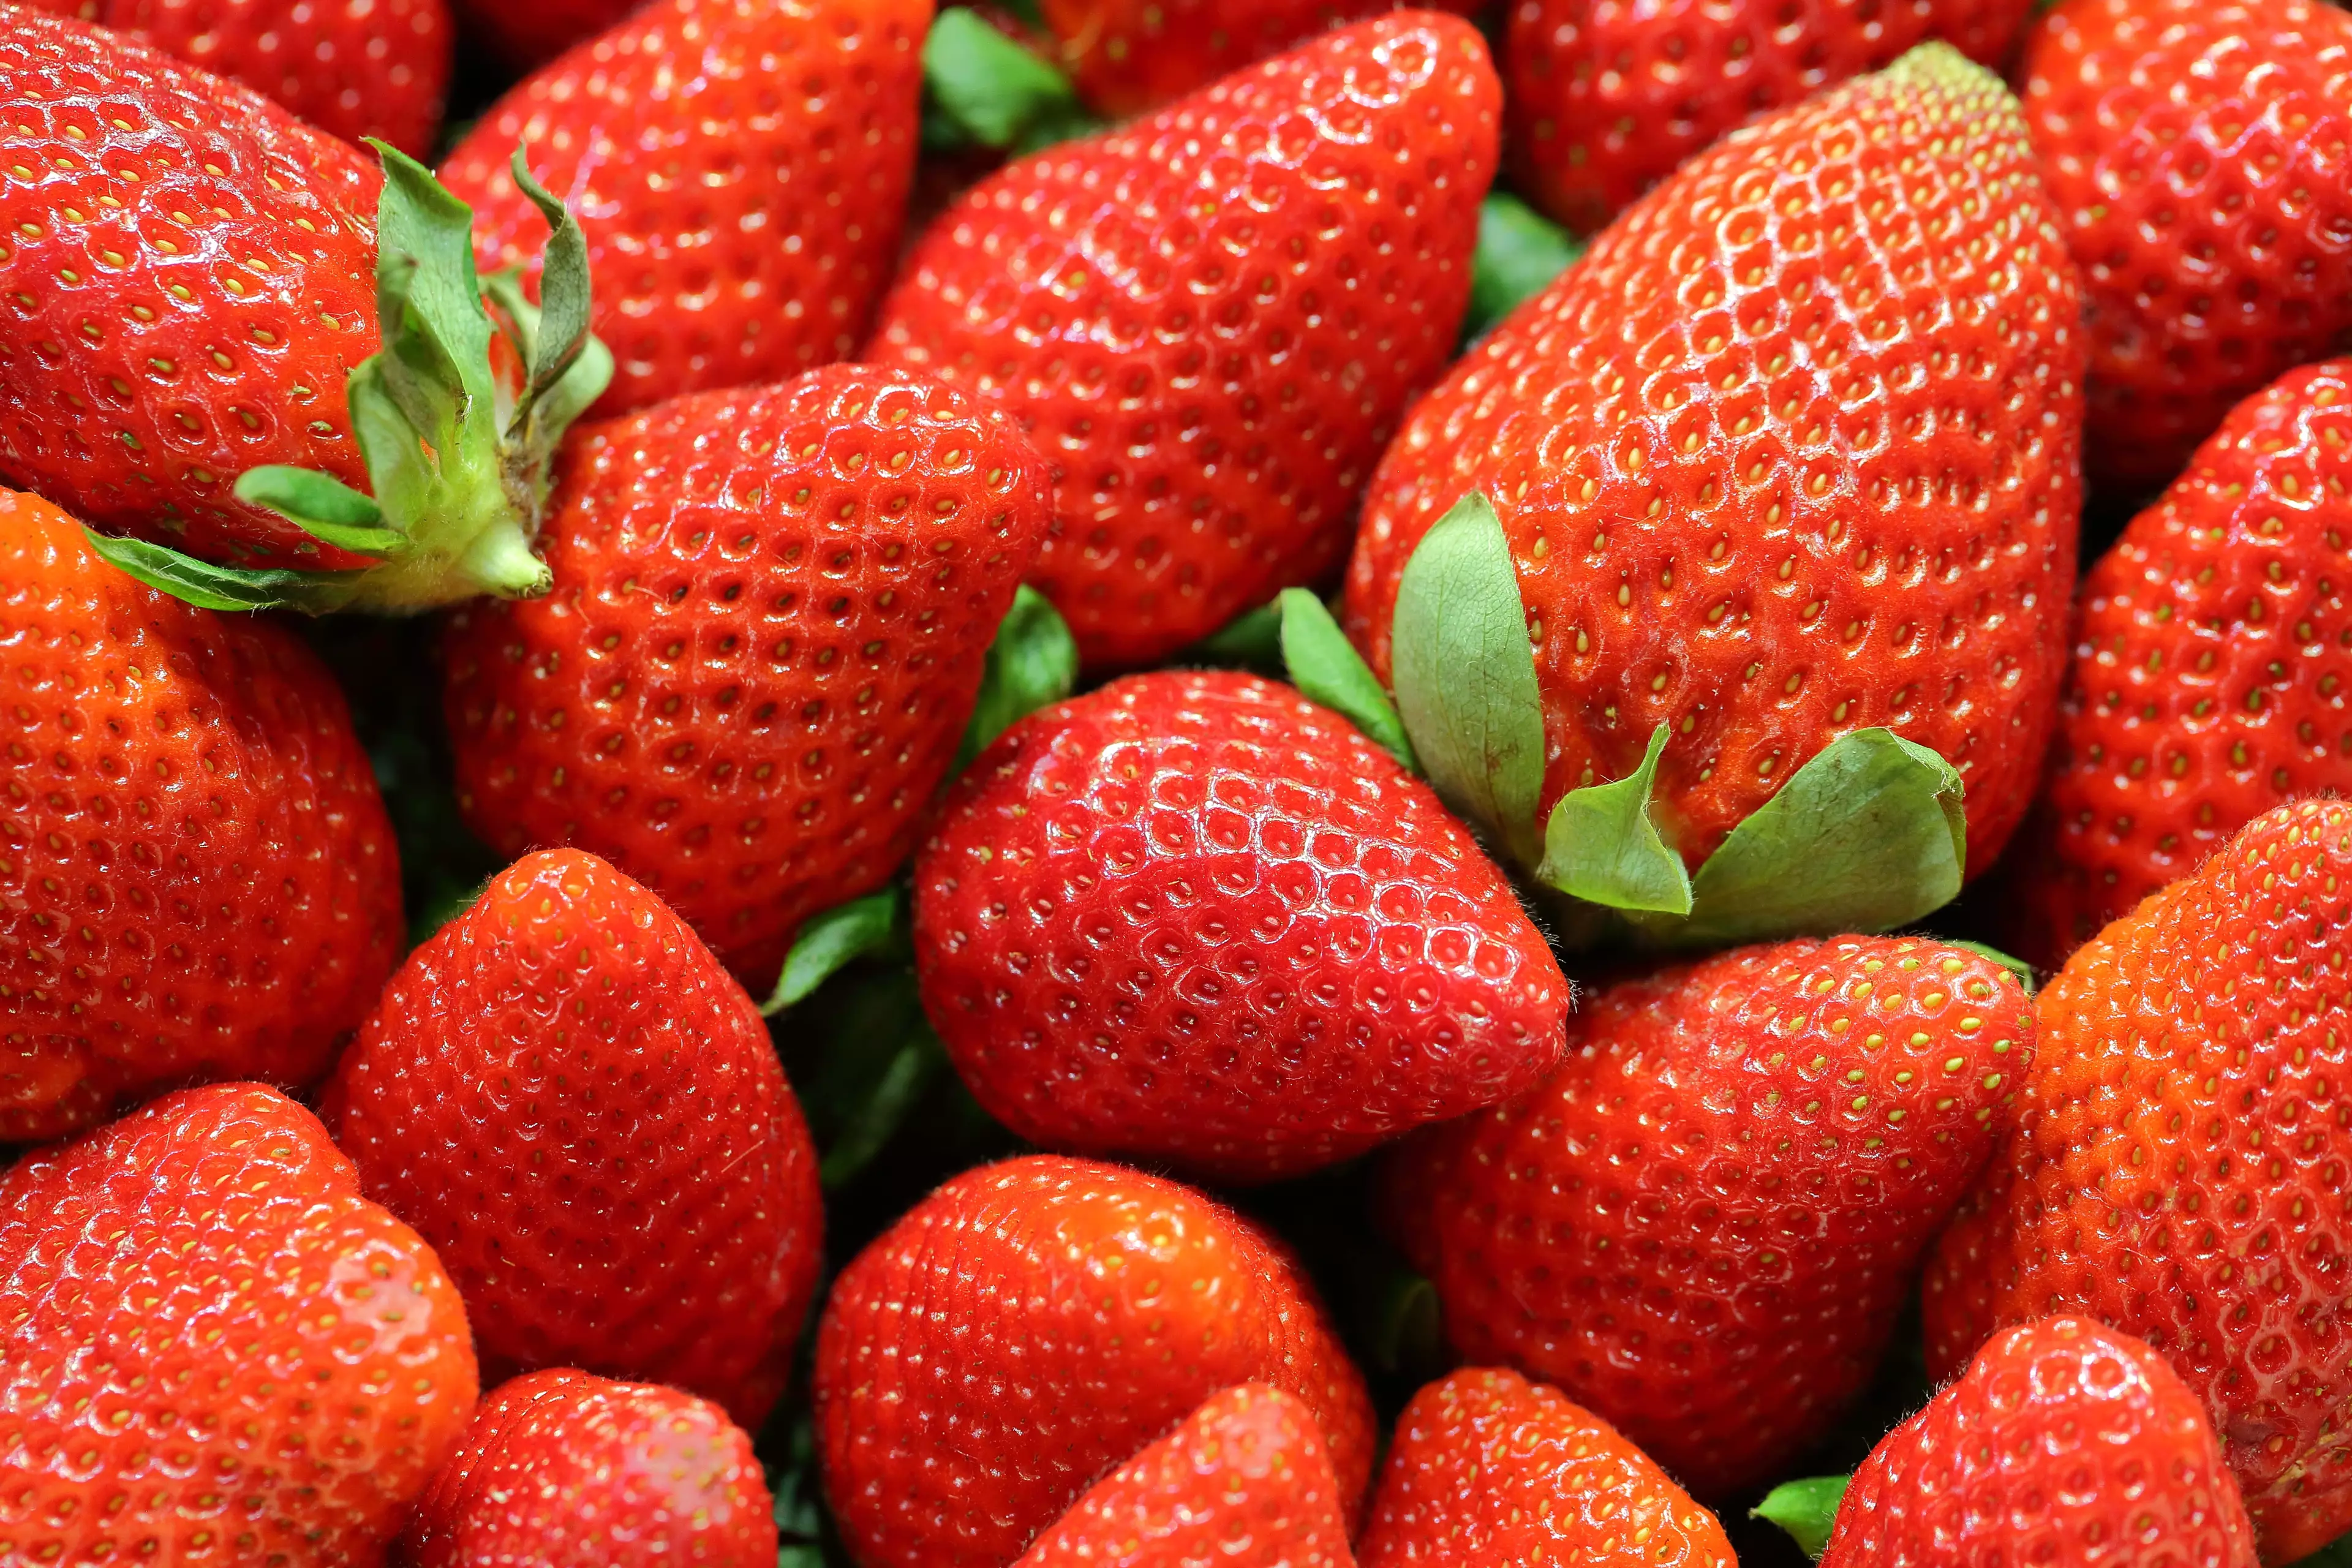 When it comes to strawberries, there are things you should and shouldn't do (